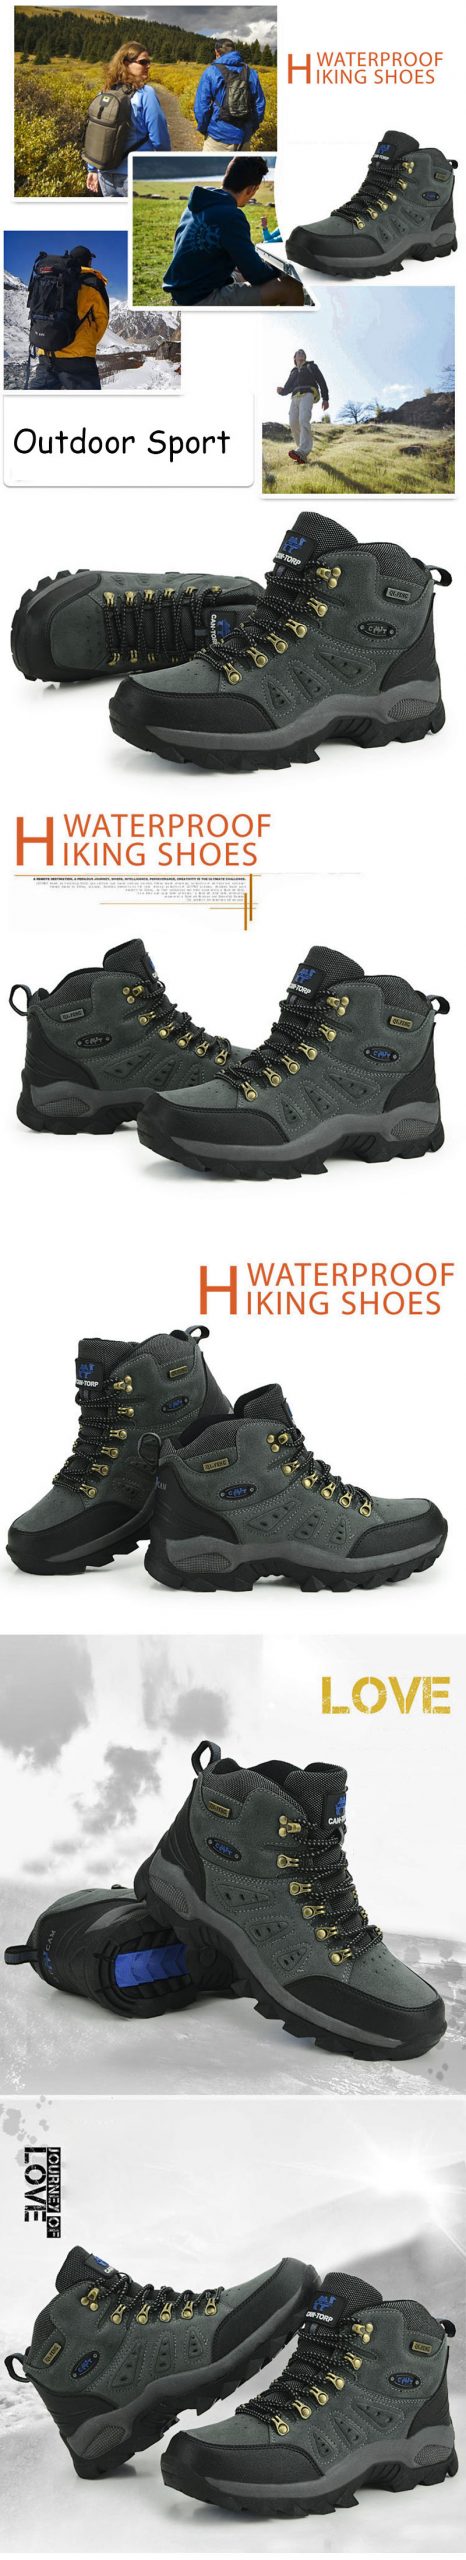 Unisex Water-resistant Hiking Boots Trekking Shoes